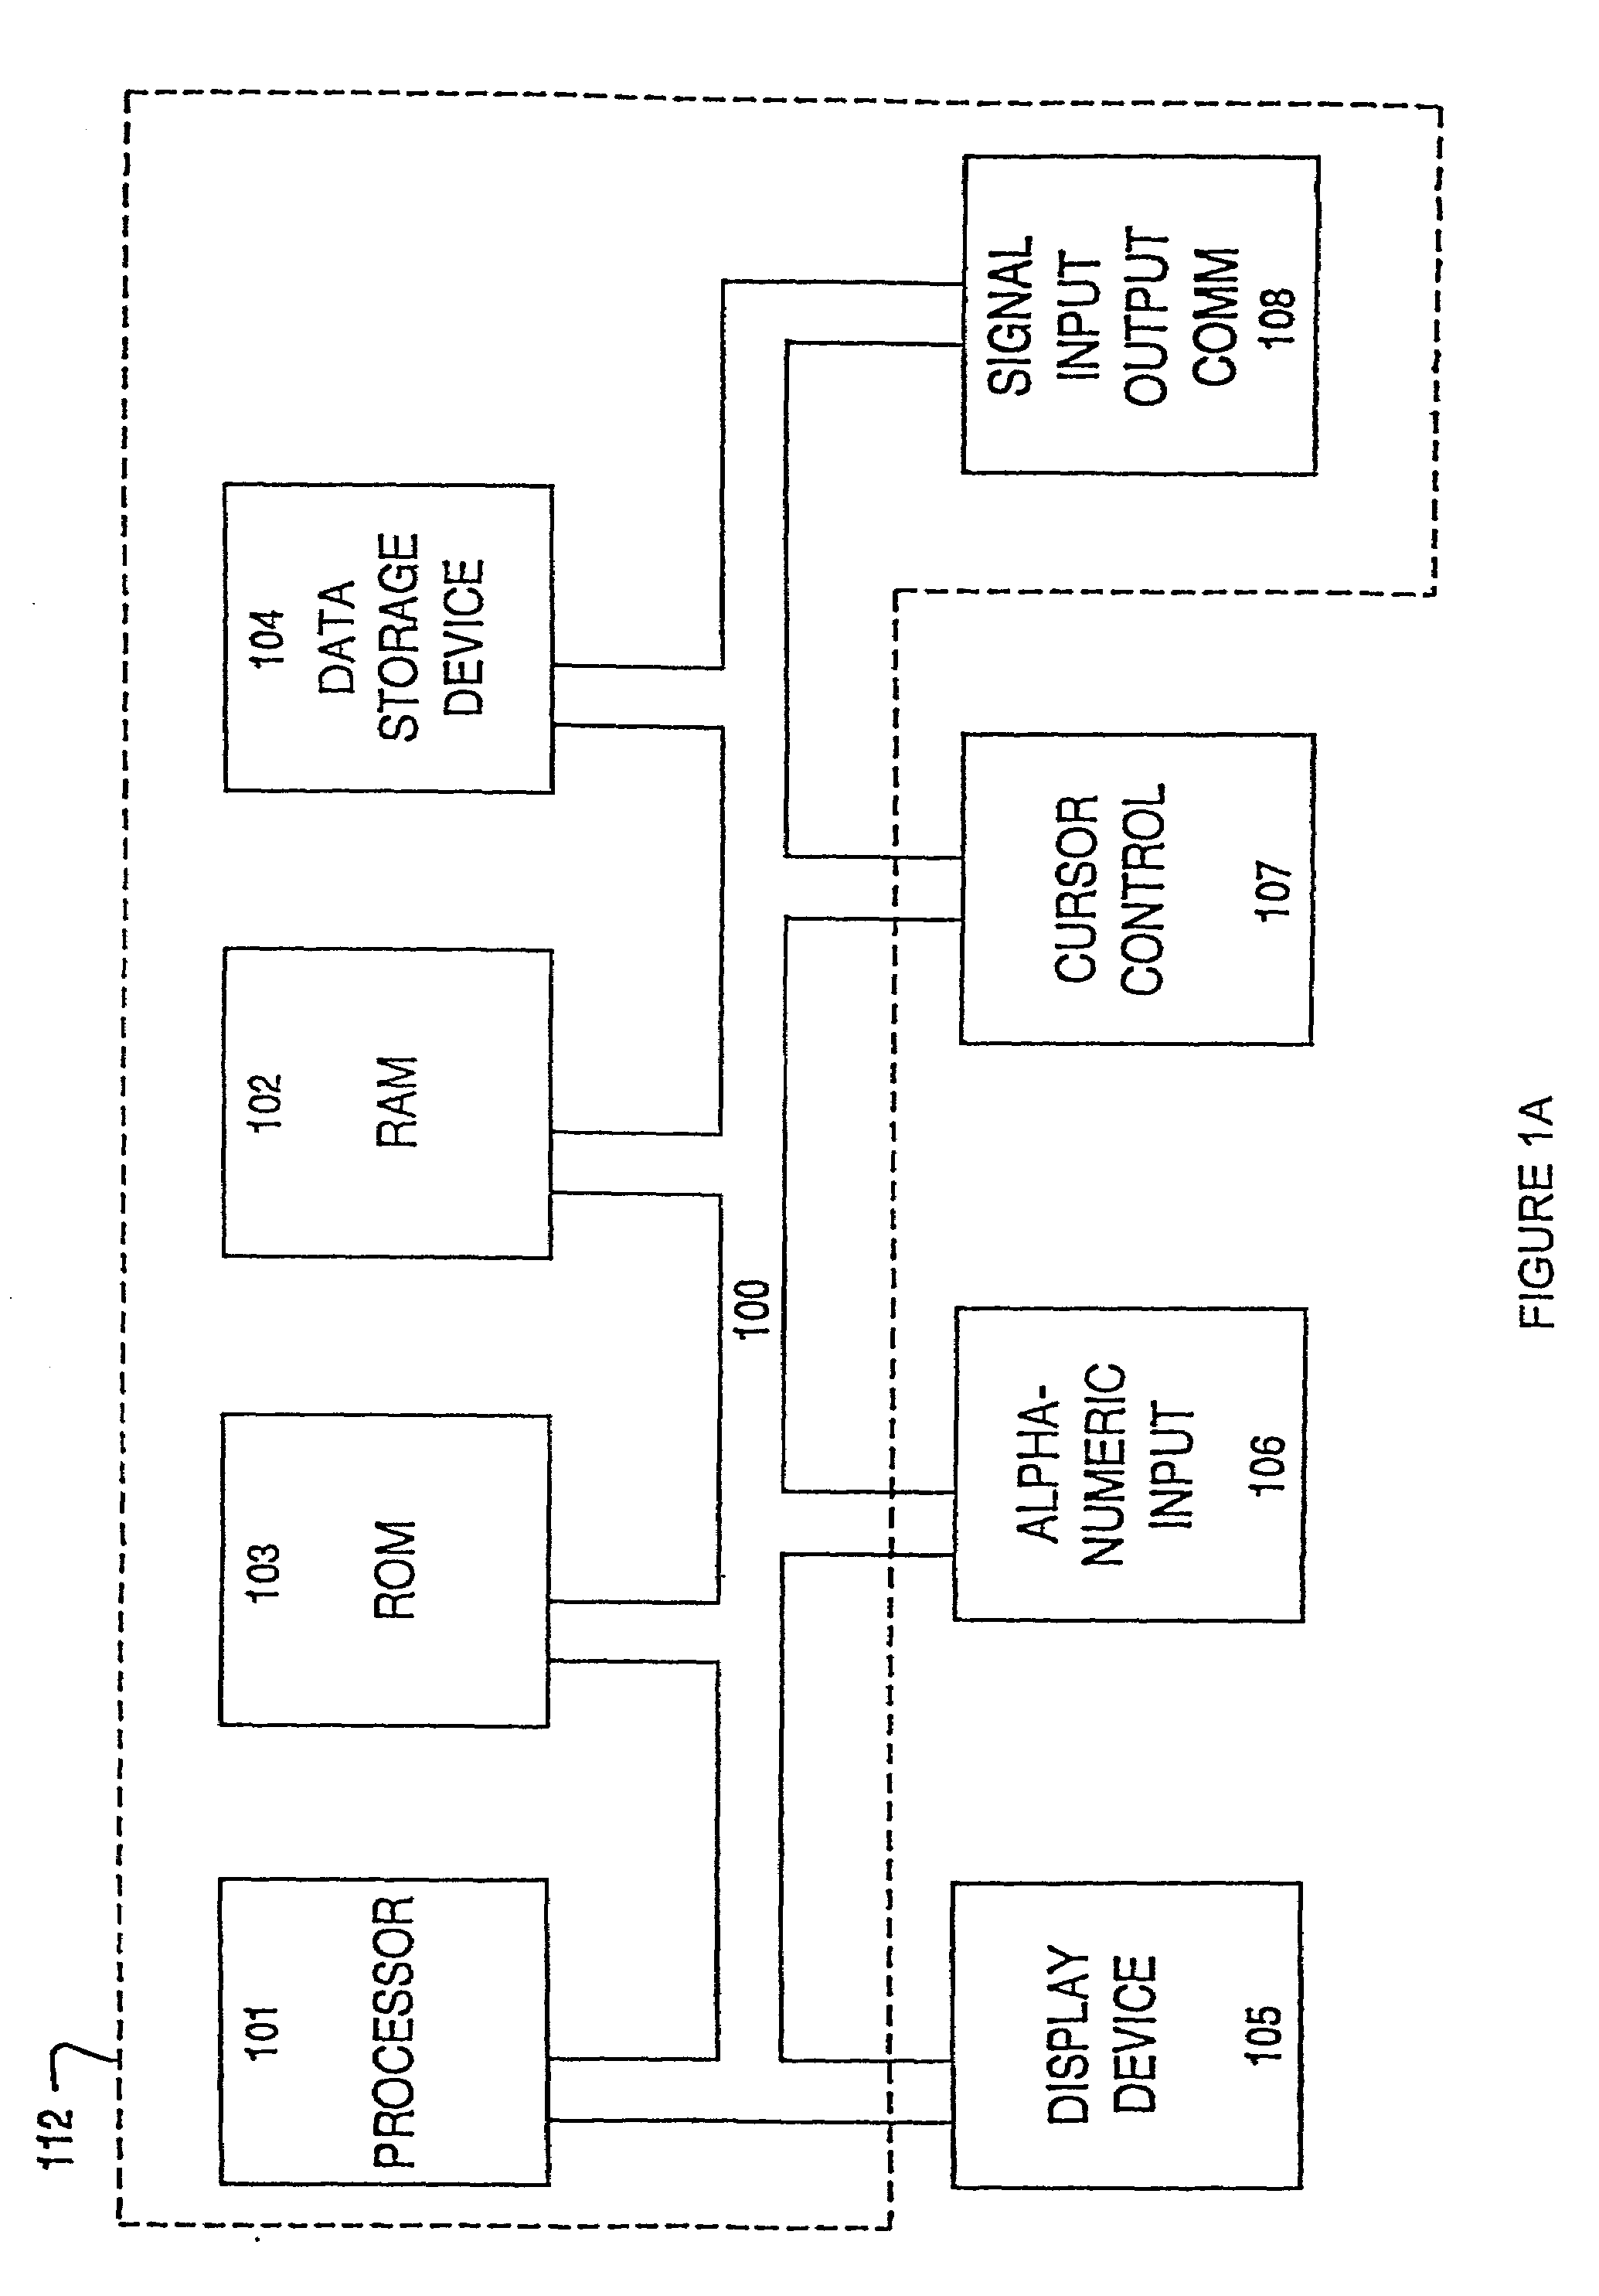 System and method for software testing with extensible markup language and extensible stylesheet language